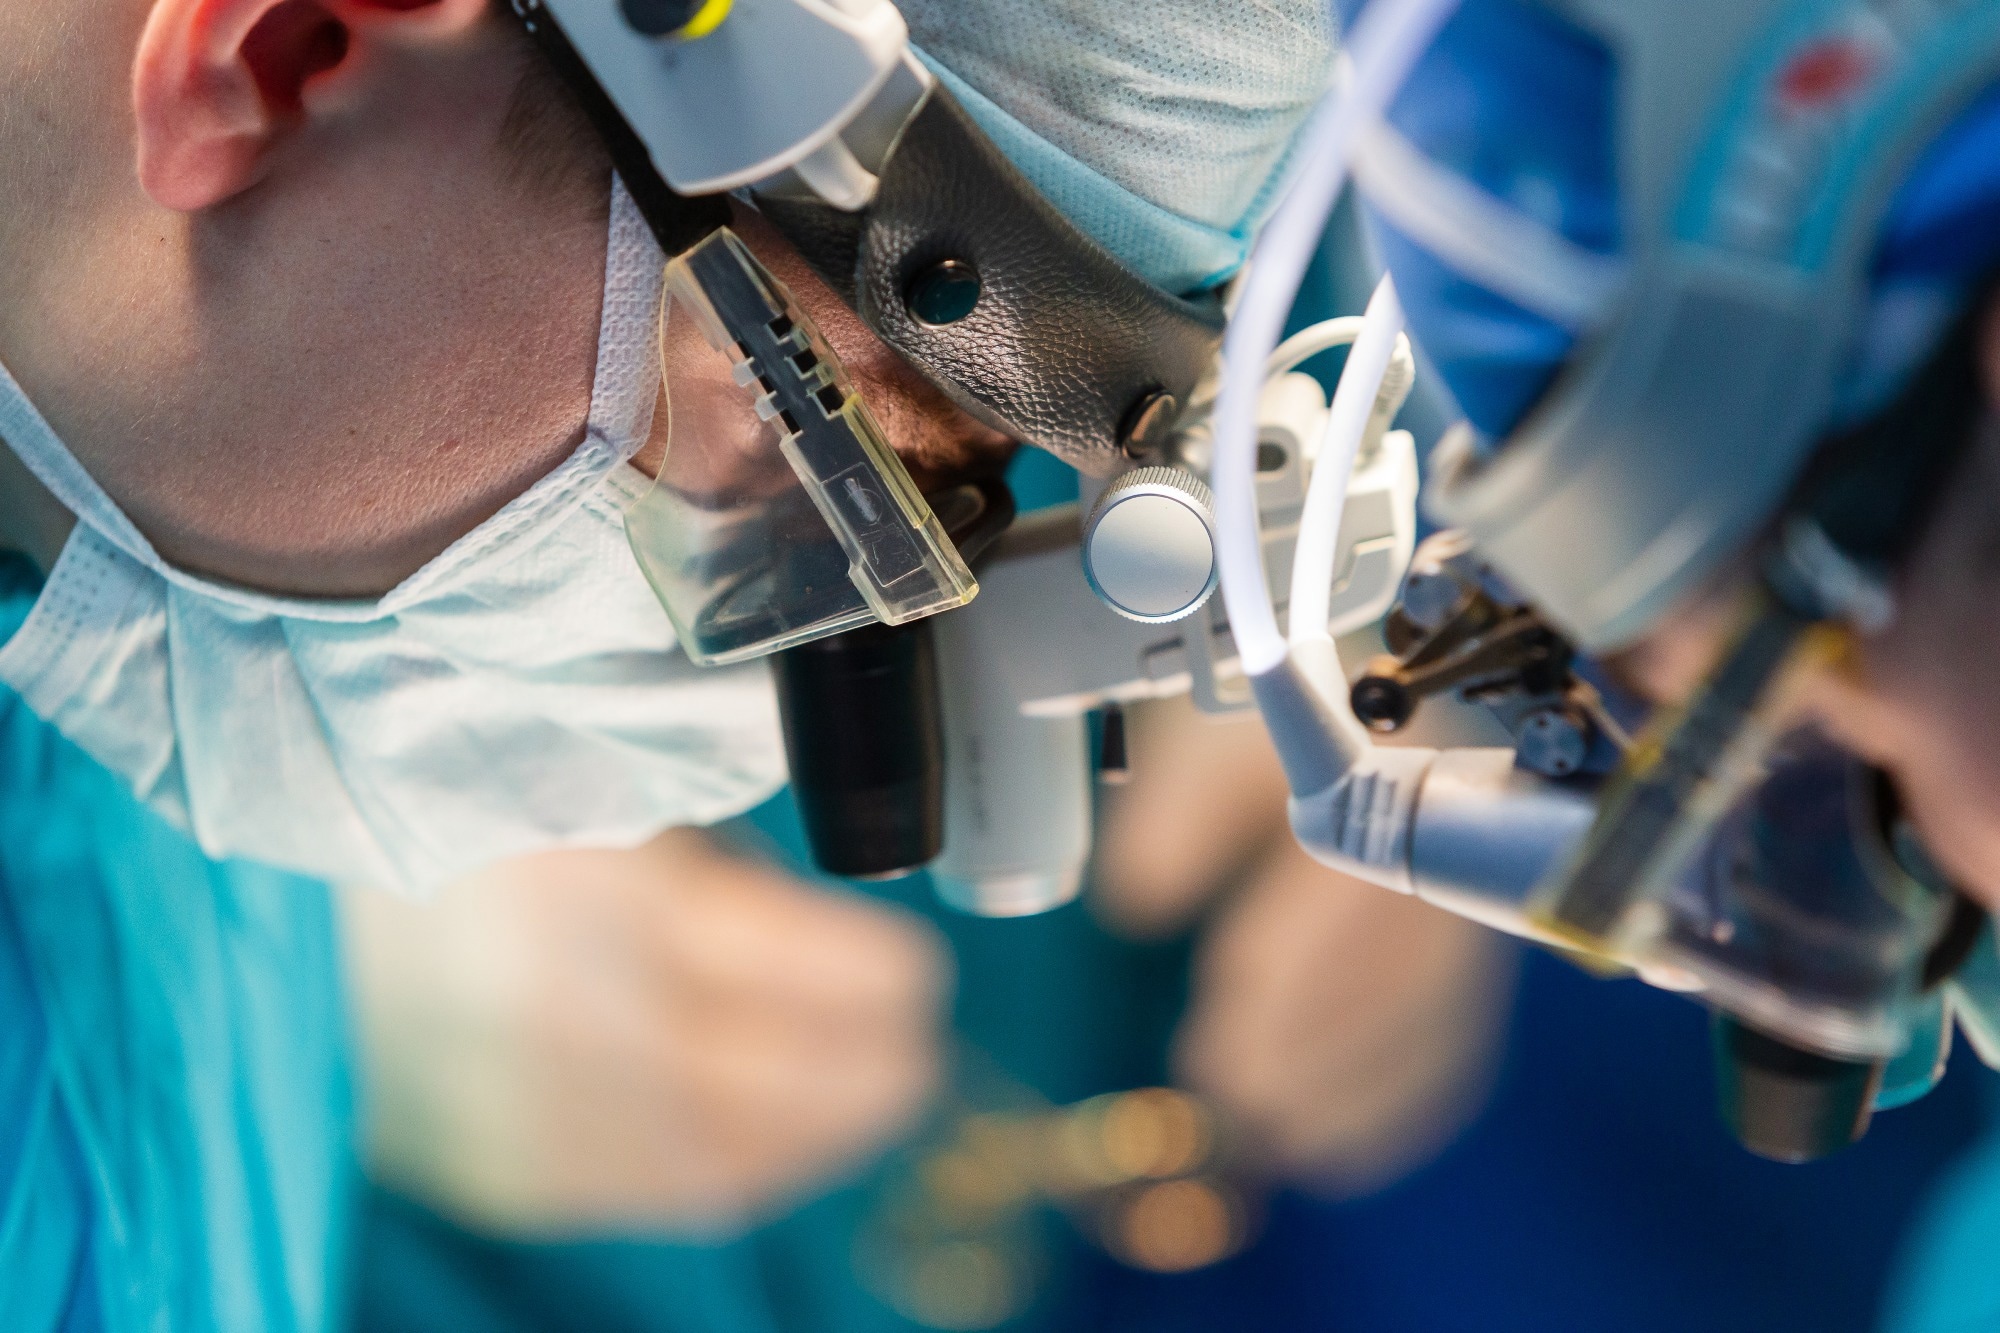 Study: Prolonged hypothermic machine perfusion enables daytime liver transplantation – an IDEAL stage 2 prospective clinical trial. Image Credit: Dmitriy Kandinskiy / Shutterstock.com